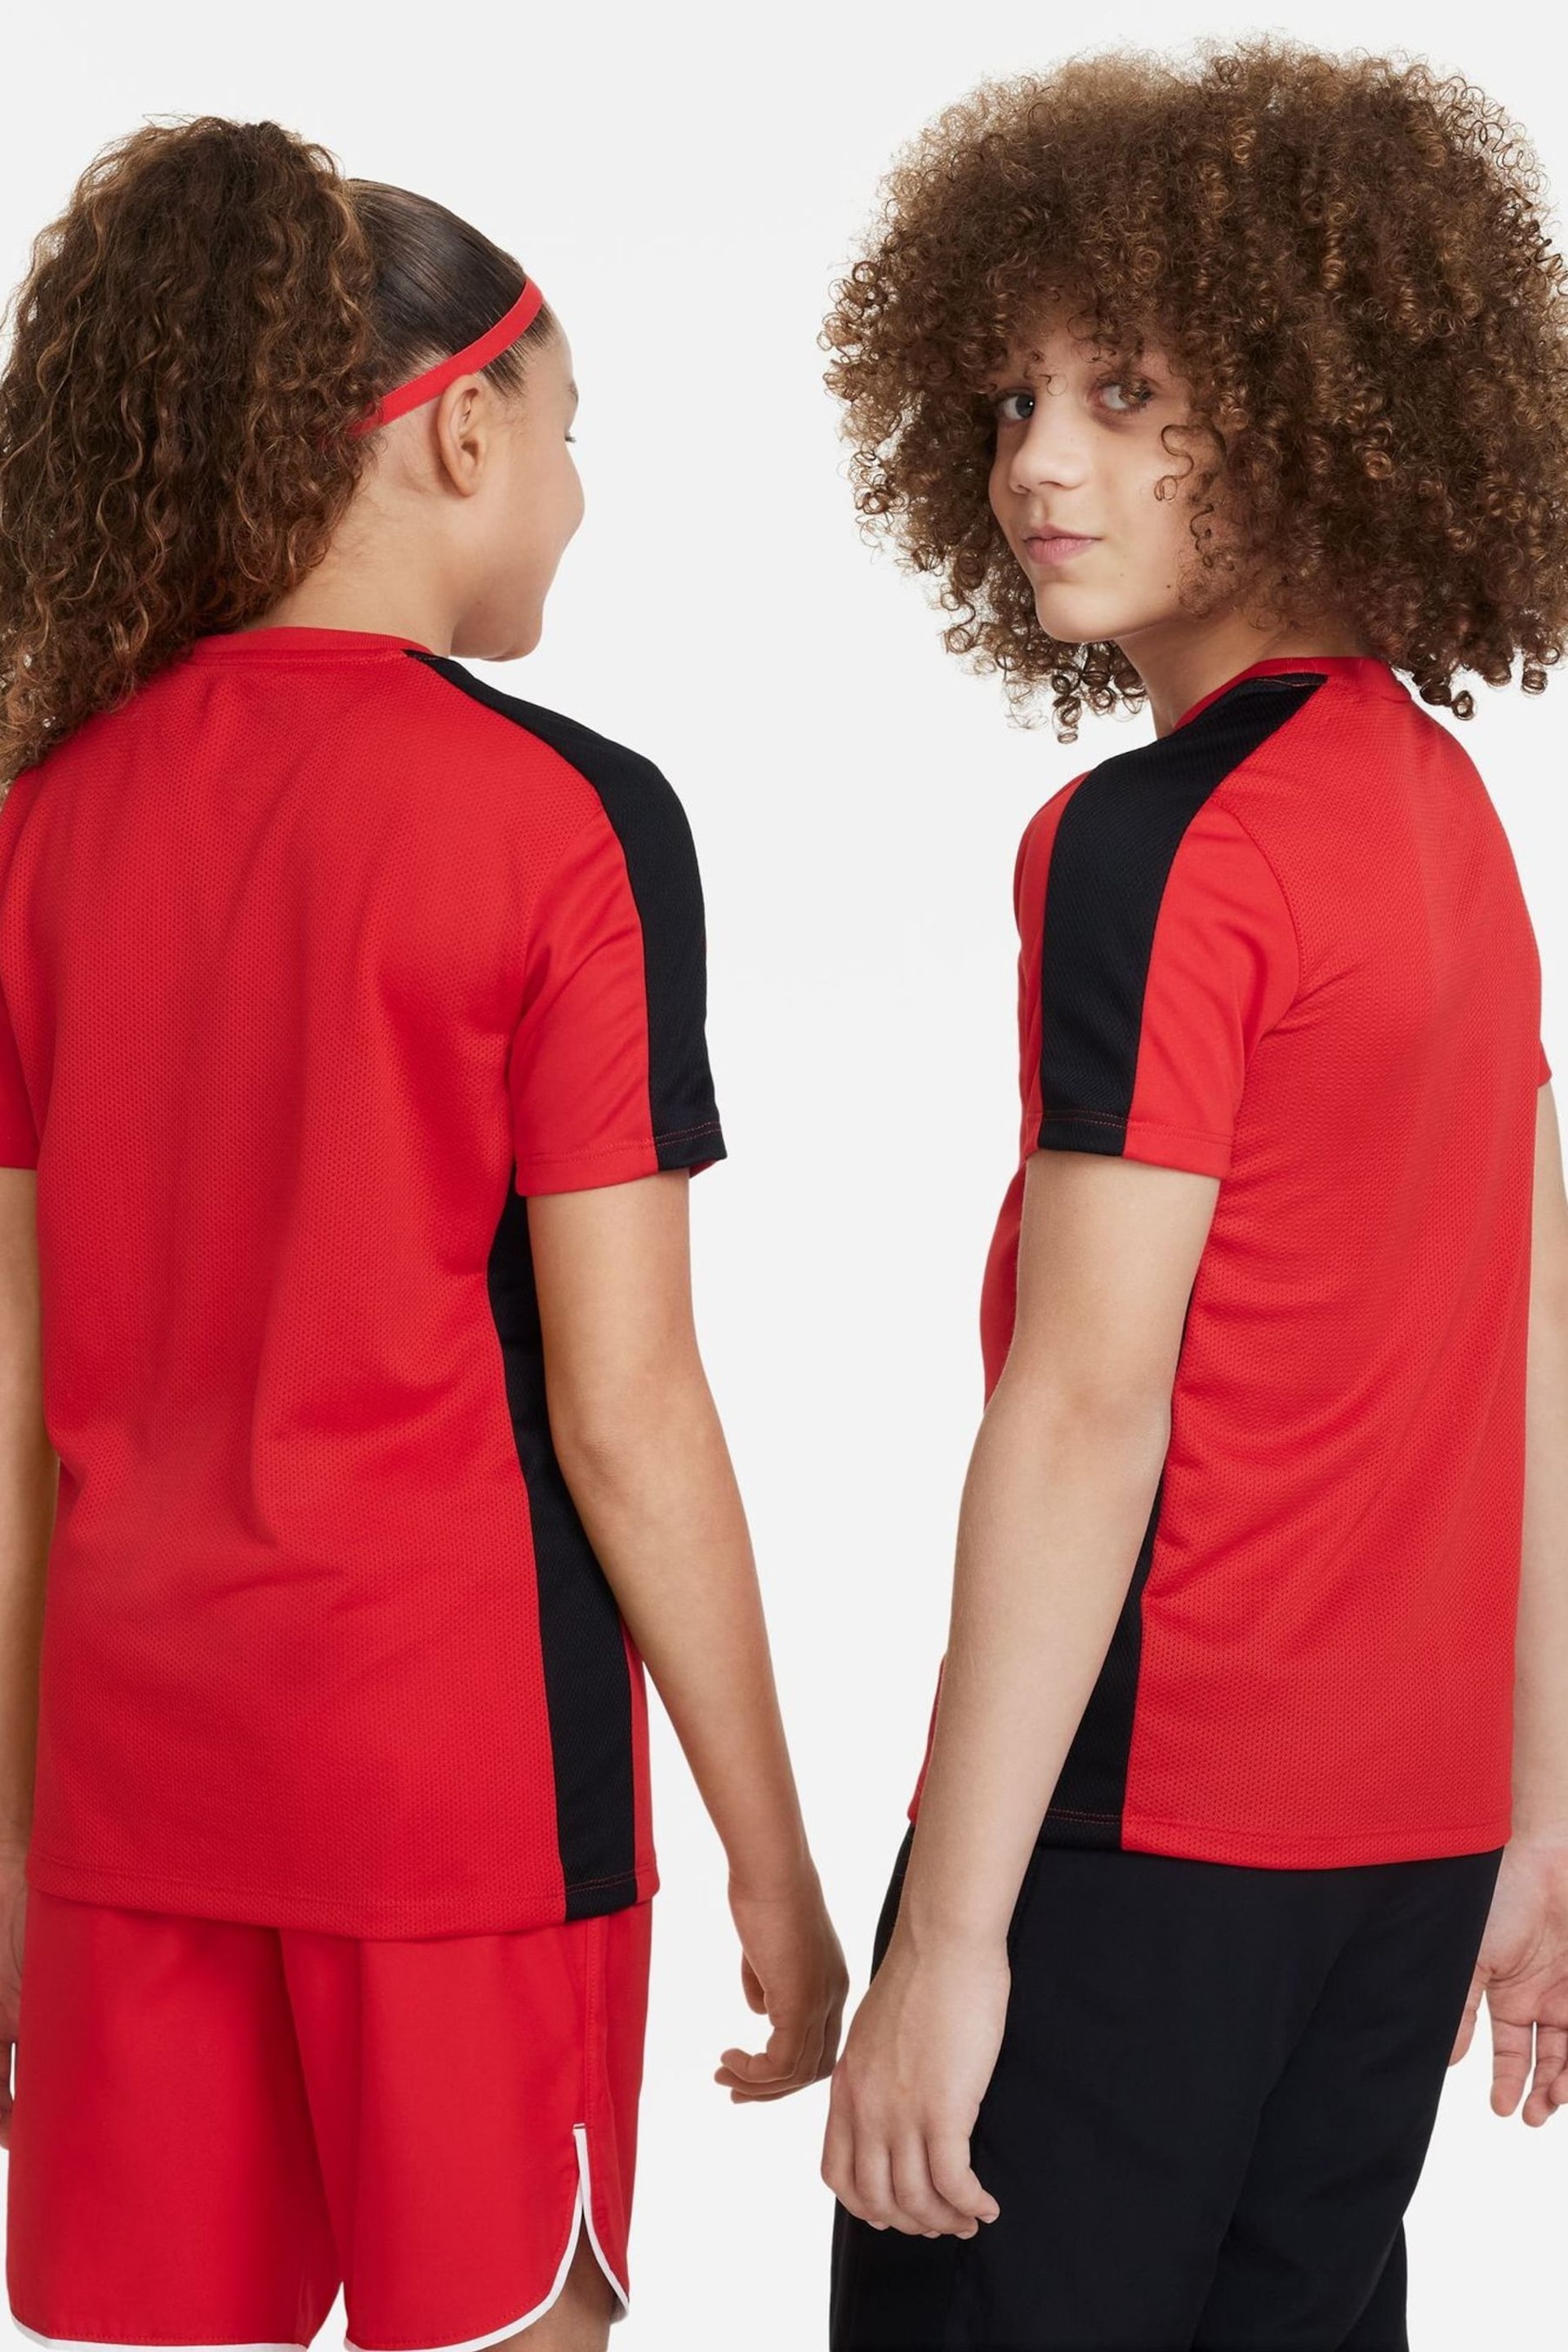 Nike Red Dri-FIT Academy Training T-Shirt - Image 4 of 7